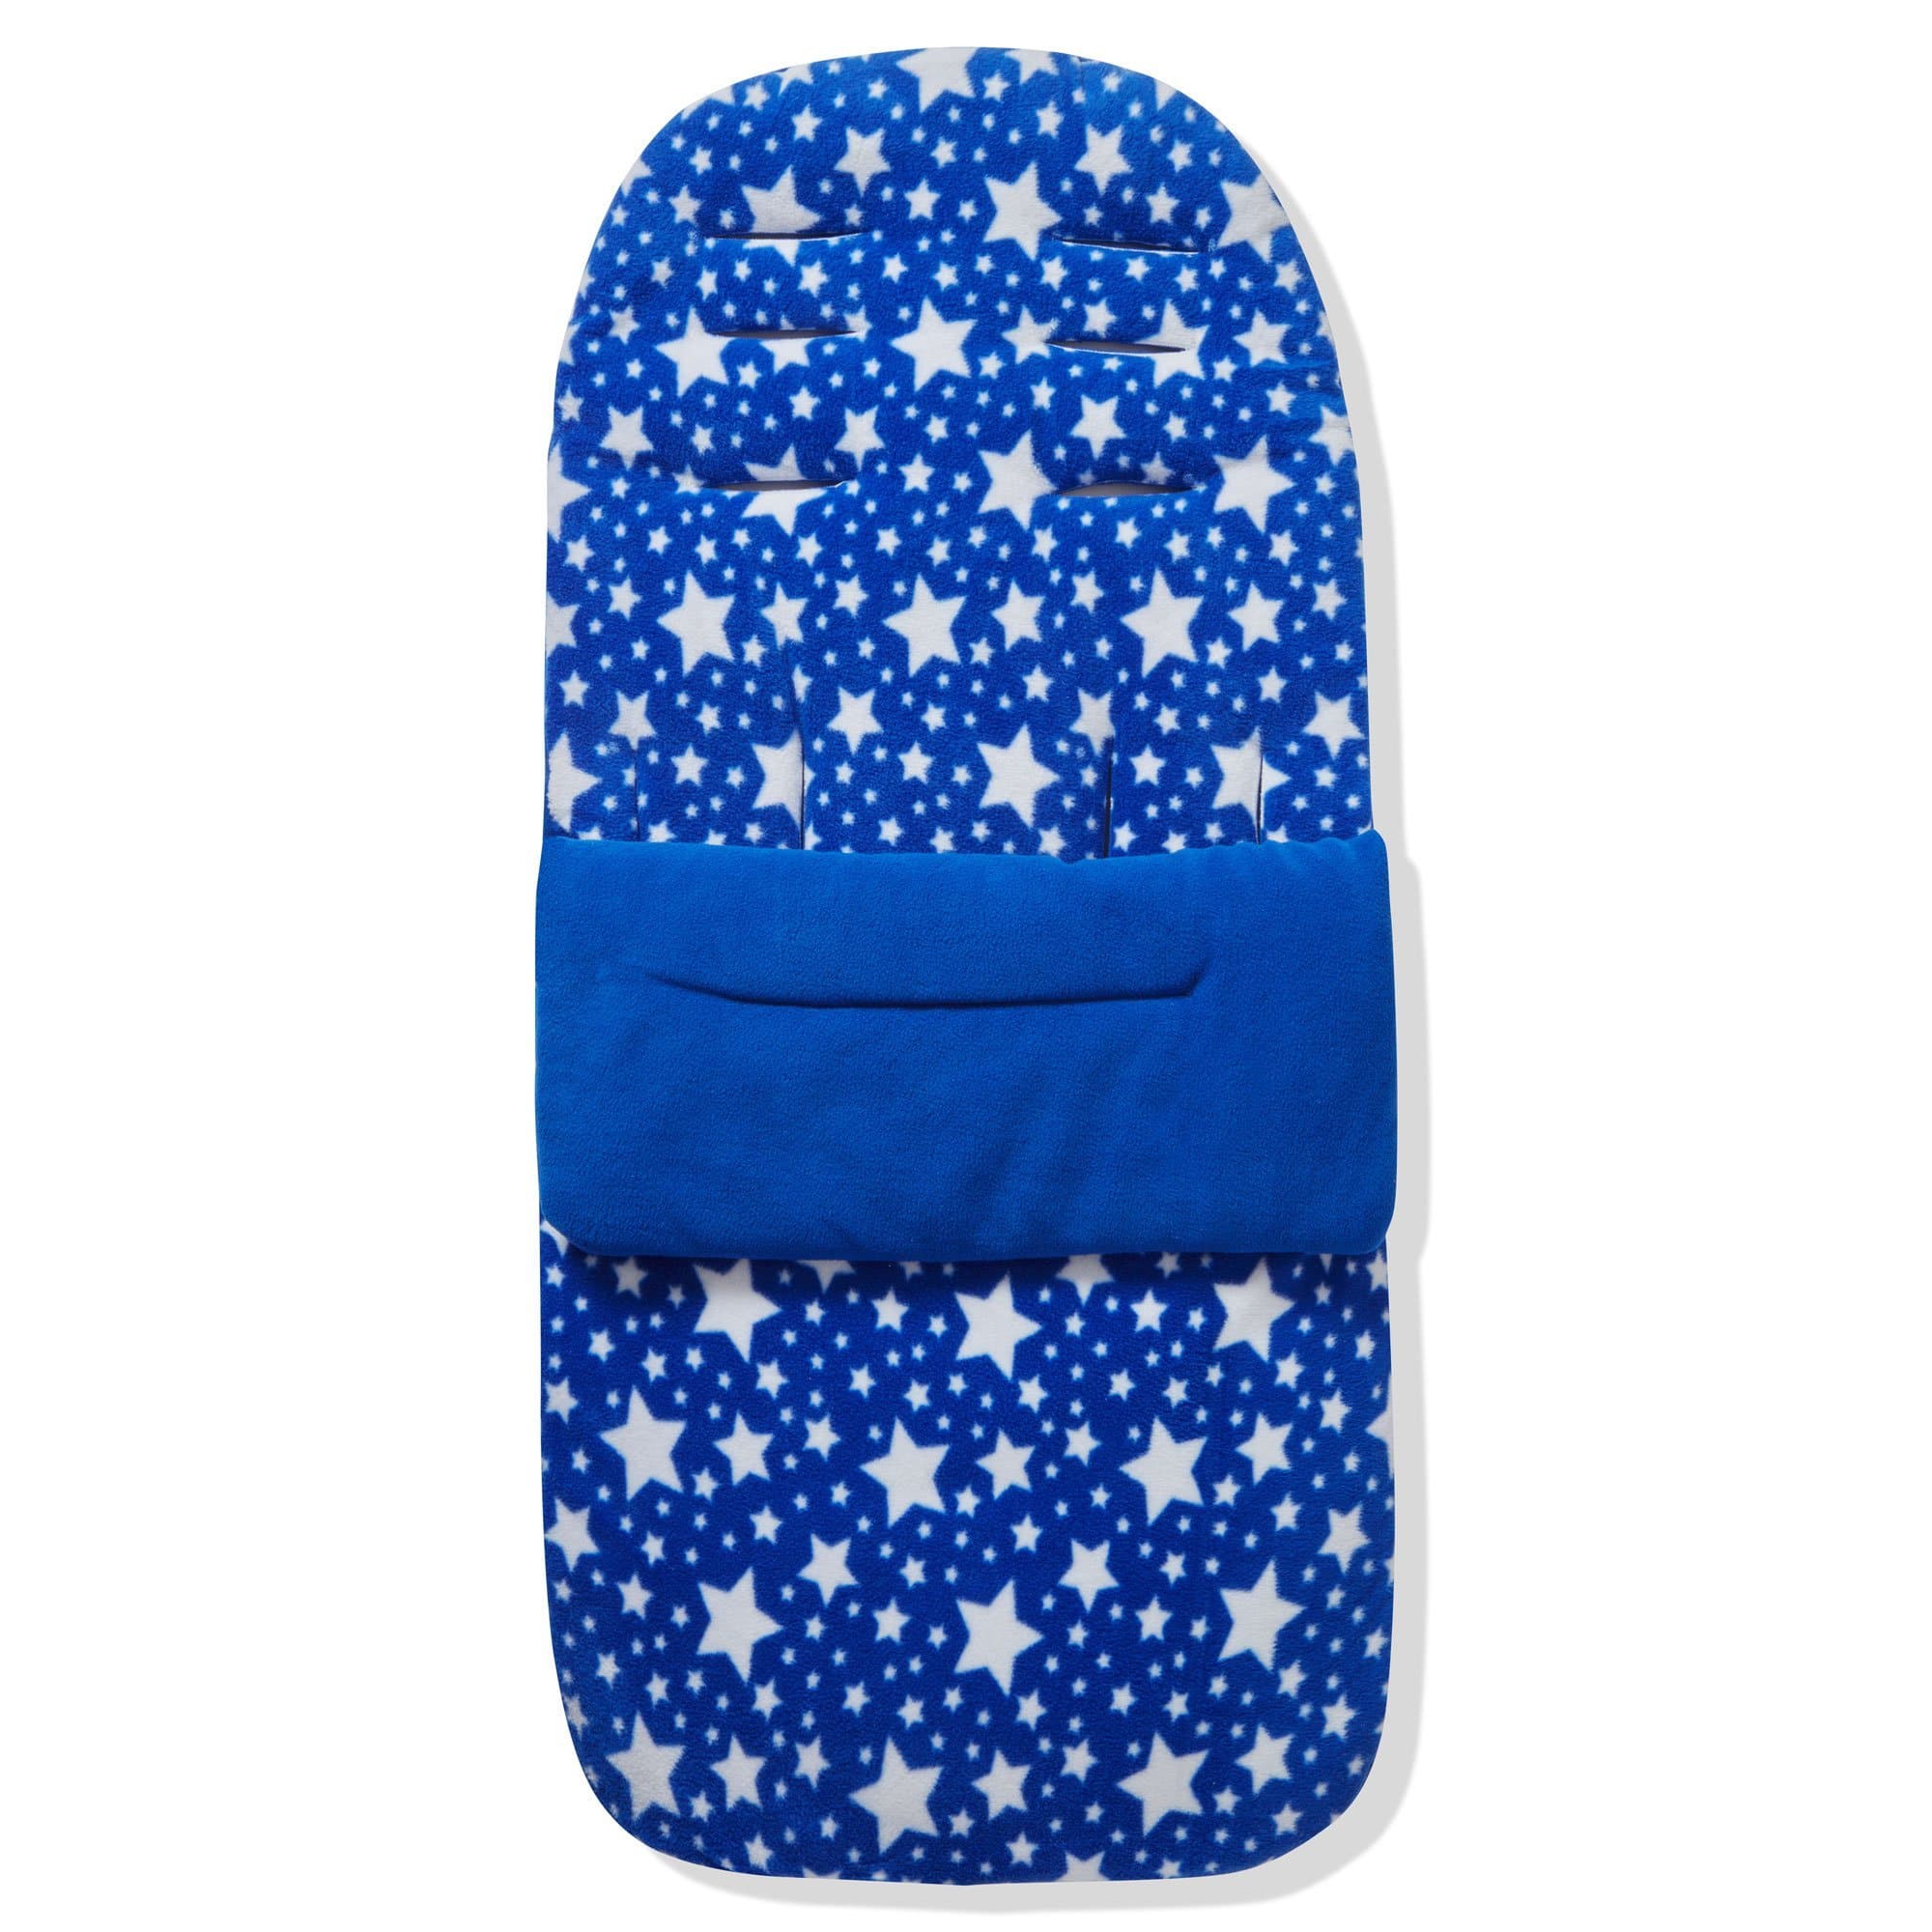 Fleece Footmuff / Cosy Toes Compatible with Noukies - Blue Star / Fits All Models | For Your Little One